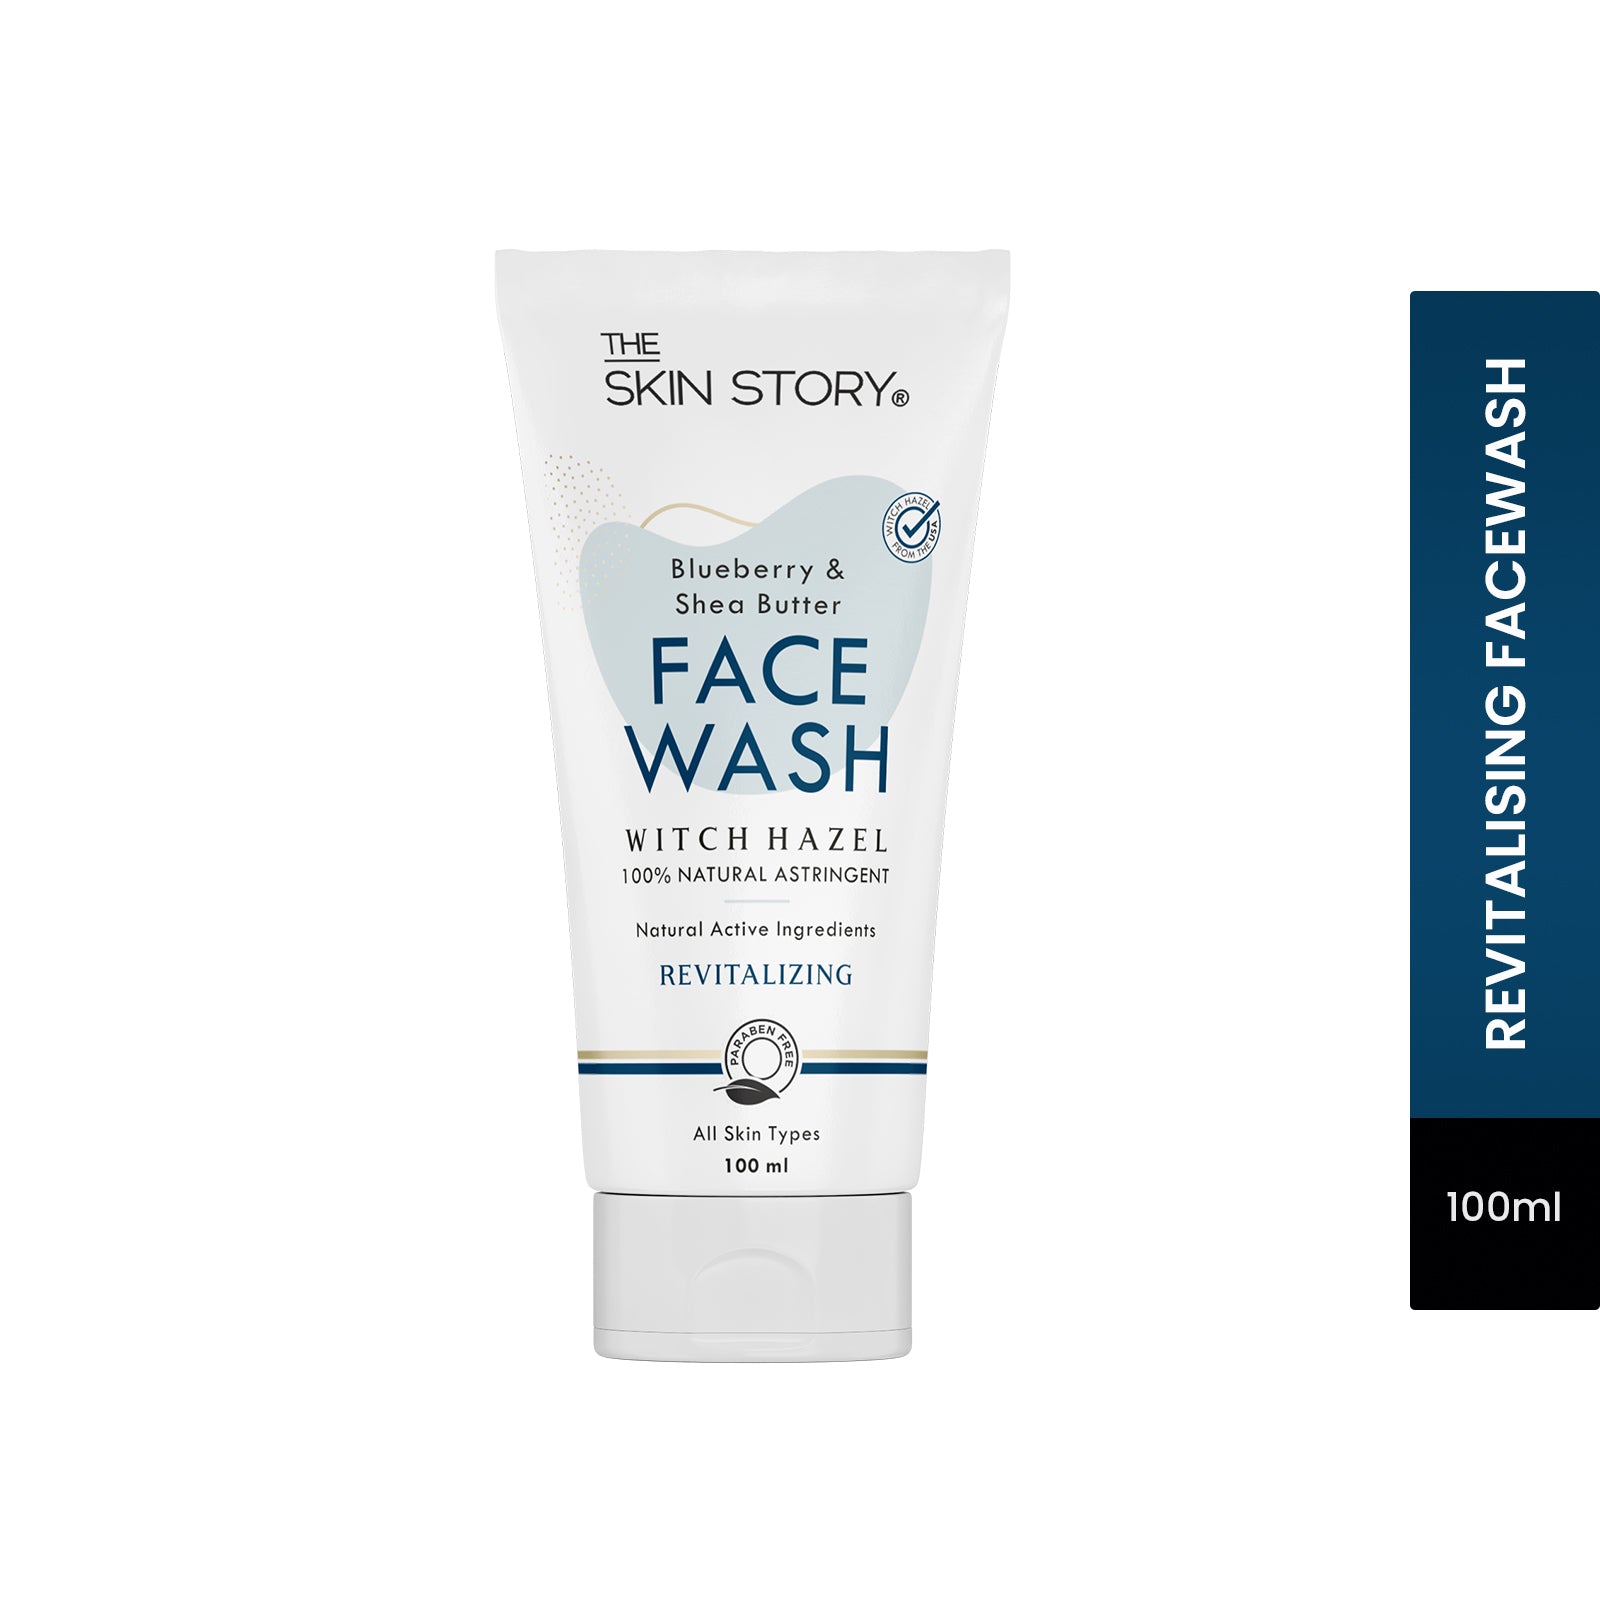 The Skin Story Deep Cleansing Facewash | Face Cleanser | Gentle Skin Cleanser | All Skin Types | Witch Hazel, Blueberry, Shea Butter | 100ml